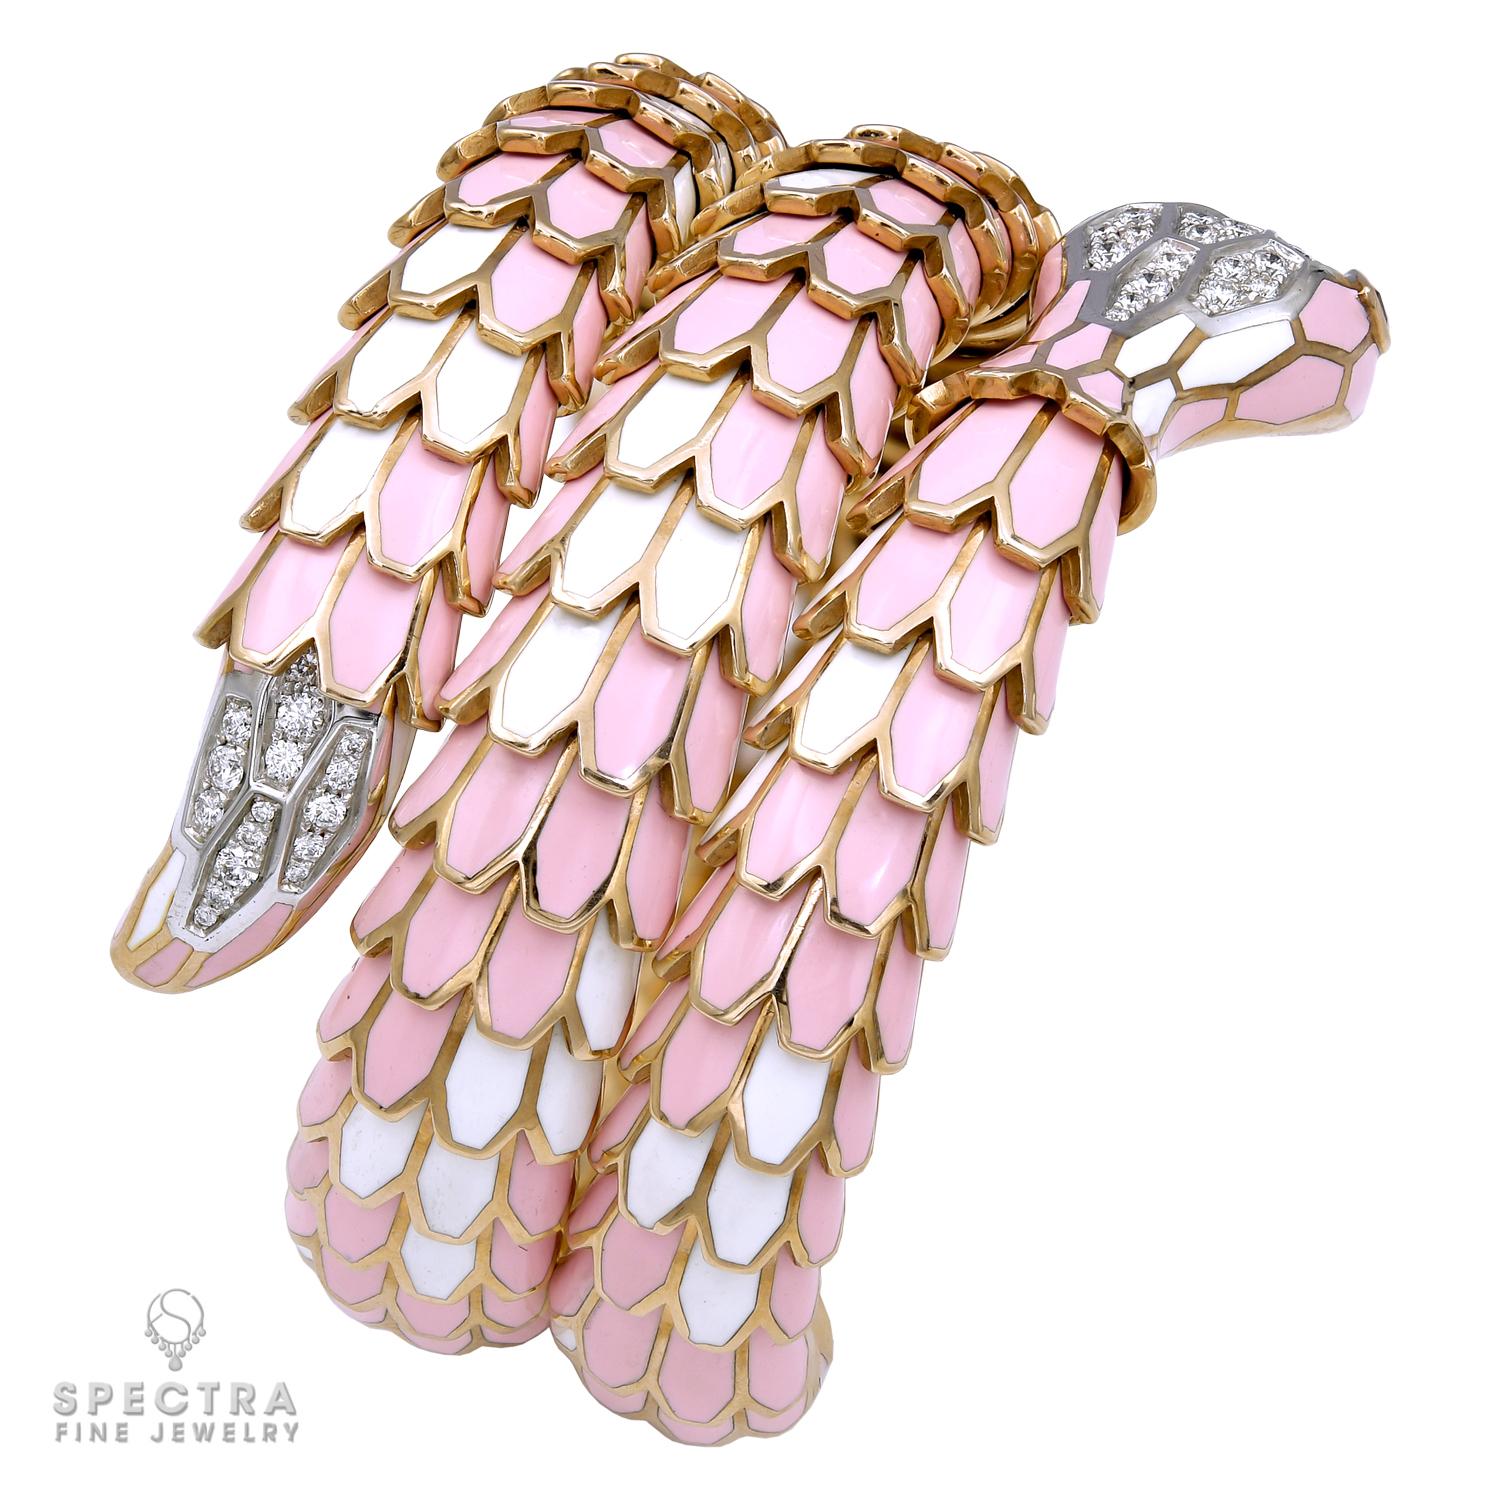 A flexible bracelet designed as a snake with diamonds and ruby eyes. 
Made in 18k rose gold & silver with pink & white enamel body.
Weight is 138.05 grams.
The bracelet does NOT contain a watch.
Fits wrists from 5 to 8 inches.
Made in Italy.